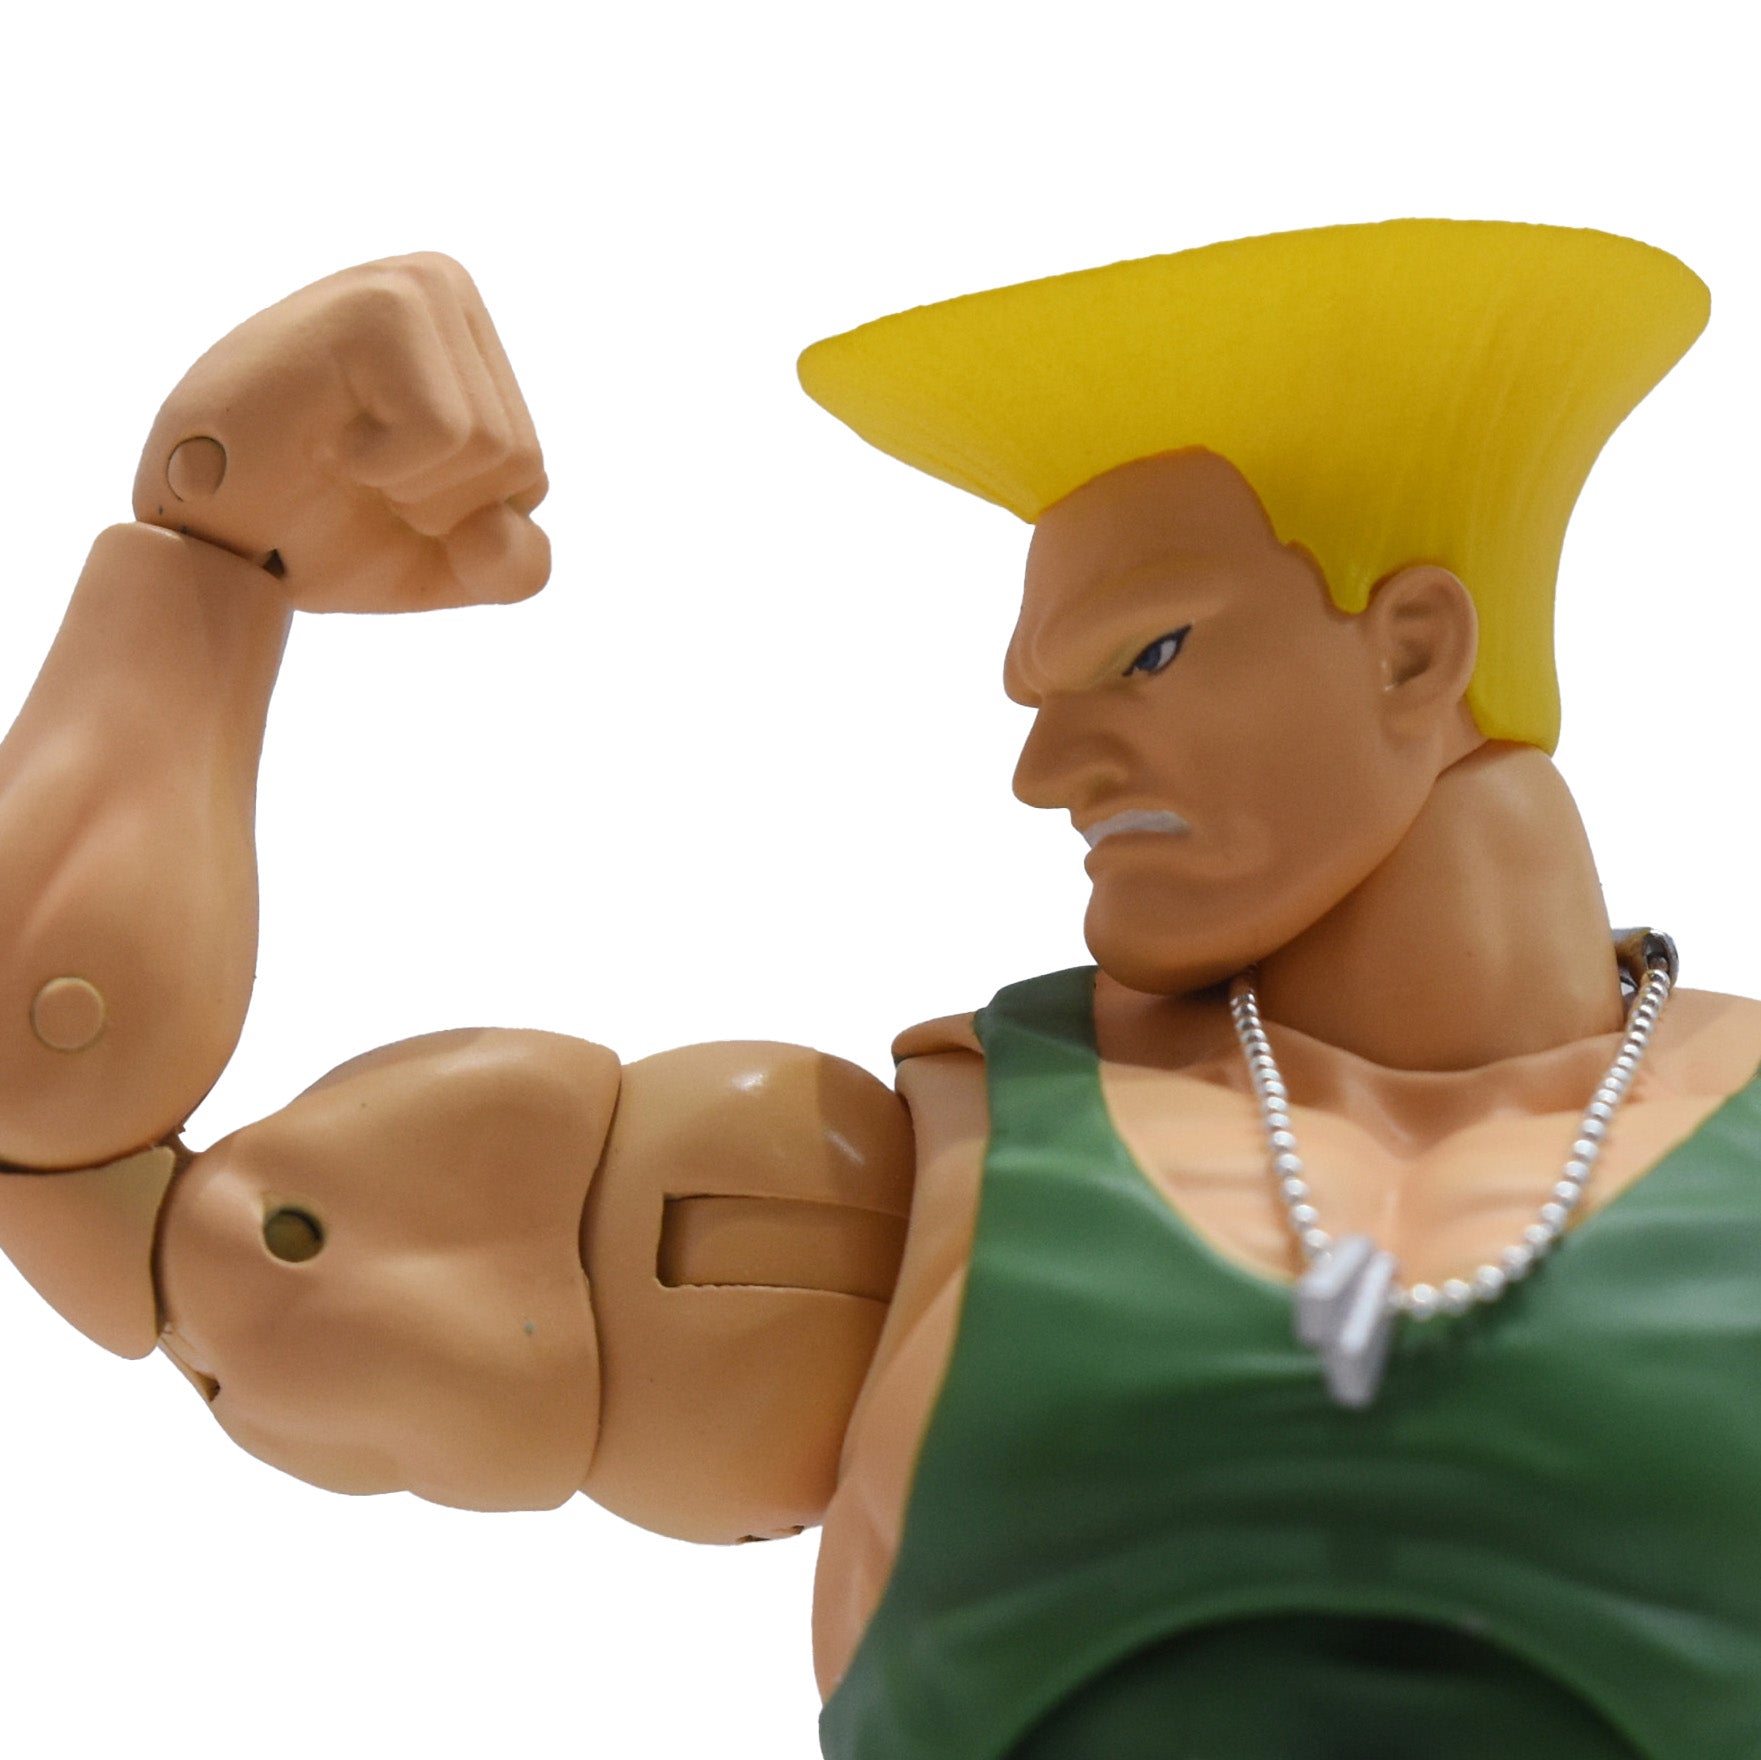 Jada Toys - Ultra Street Fighter II: The Final Challengers - Guile (6") - Marvelous Toys